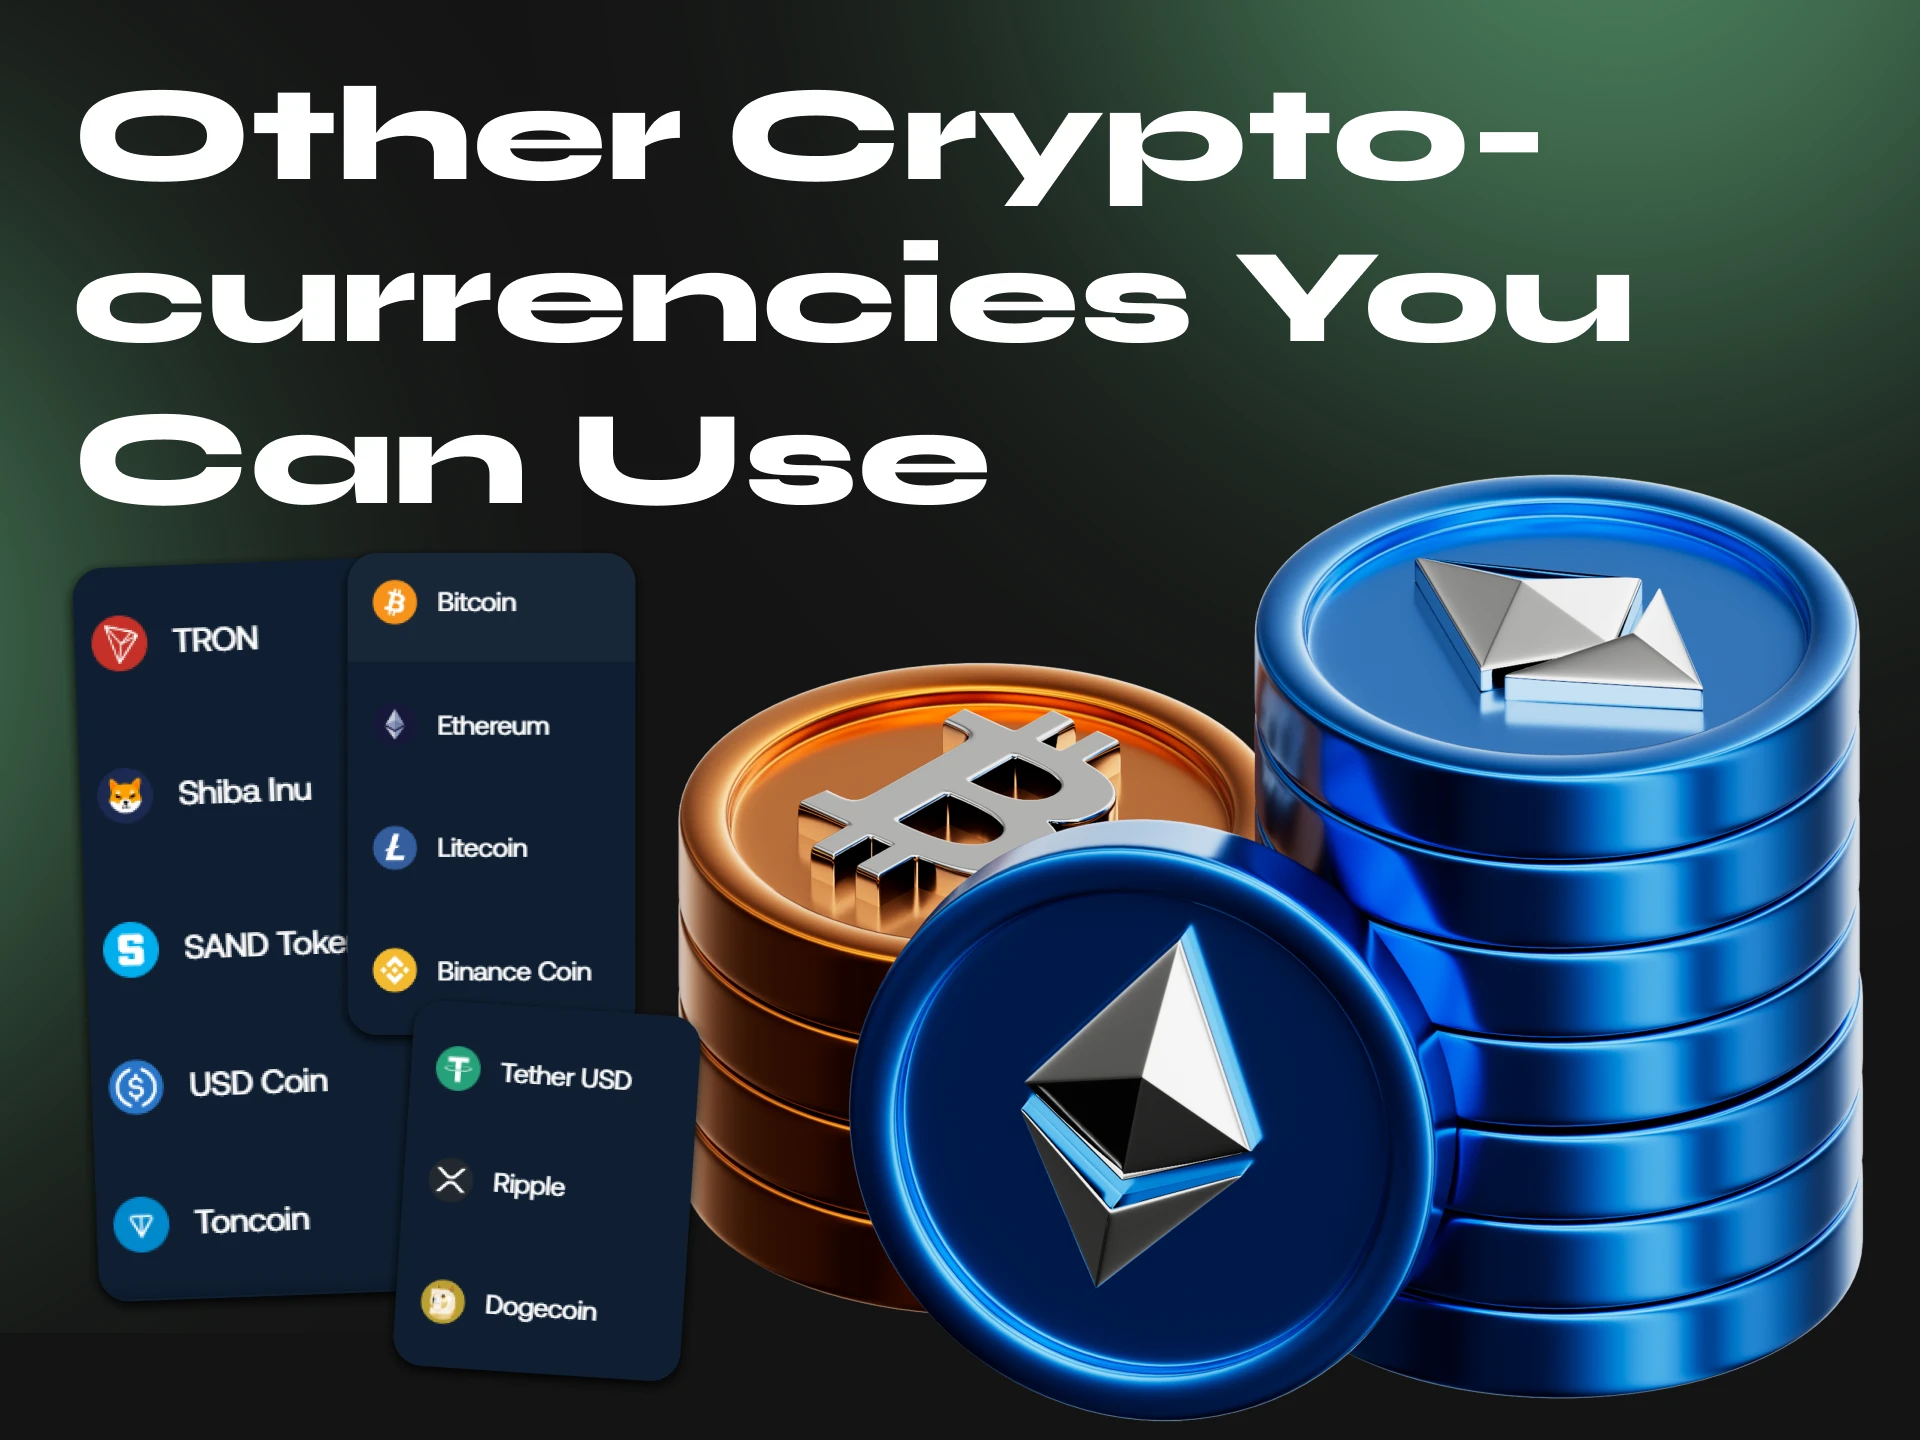 Try playing blackjack with cryptocurrencies such as Bitcoin, Ethereum, USDT and more.